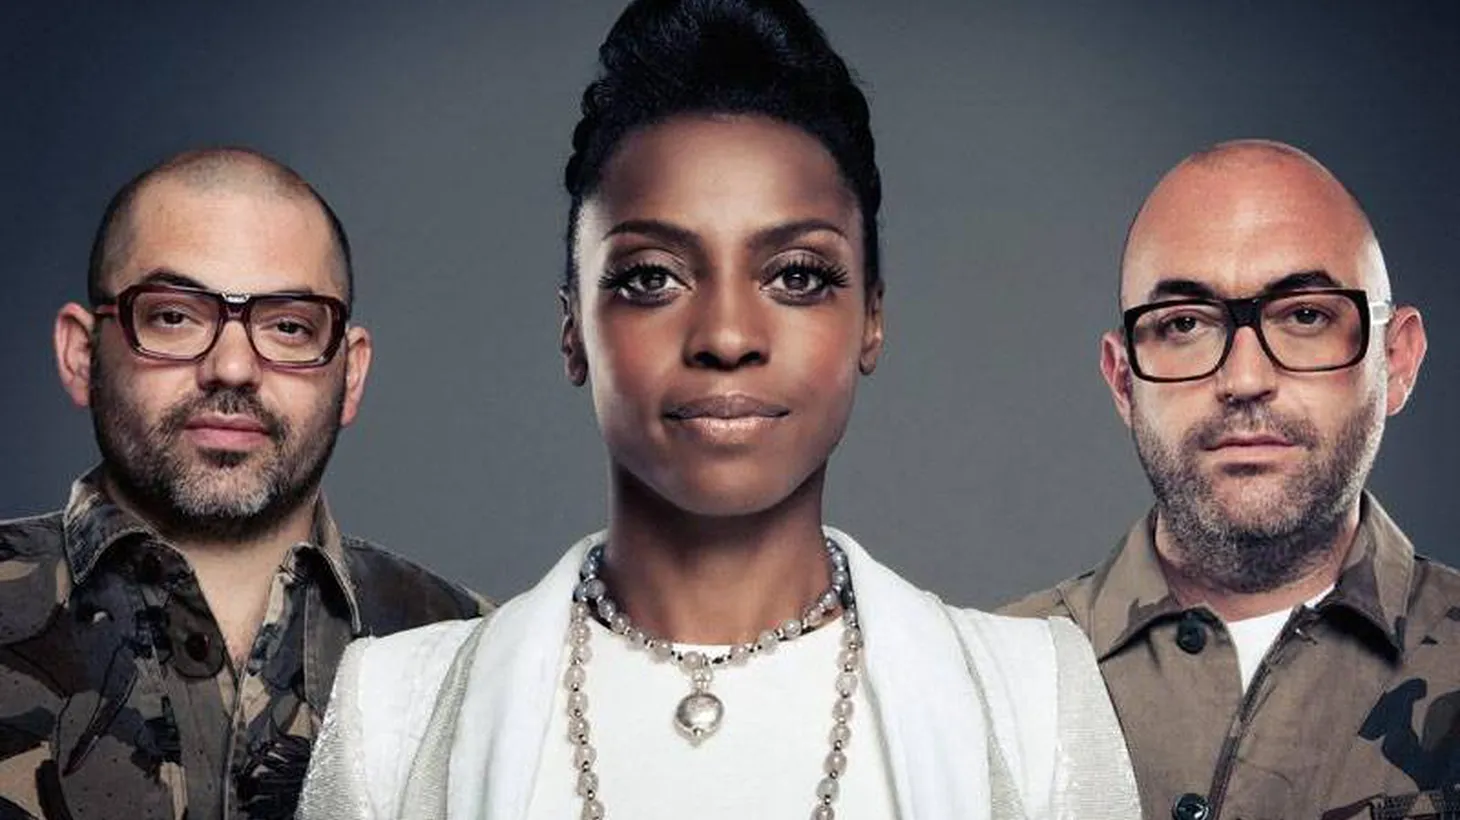 The trio Morcheeba sketched out the blueprint for trip hop years ago and their influence has been felt far and wide.